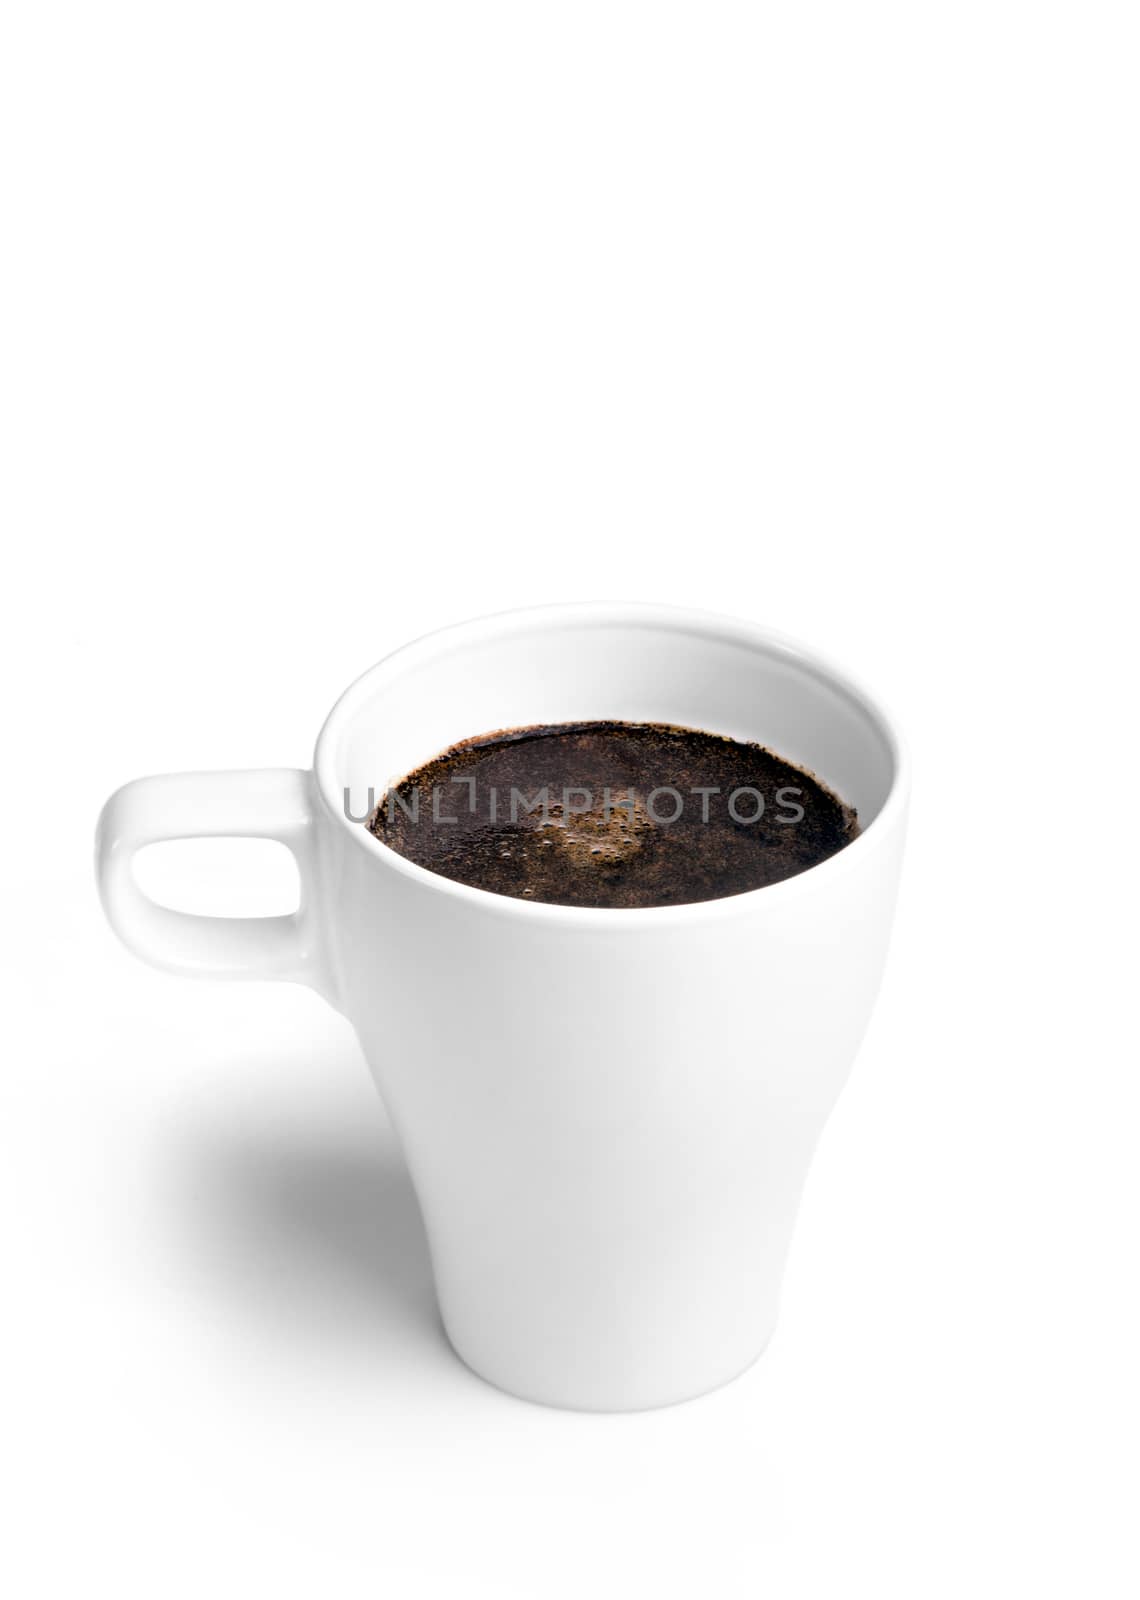 Whie cup of coffee isolated on white background.